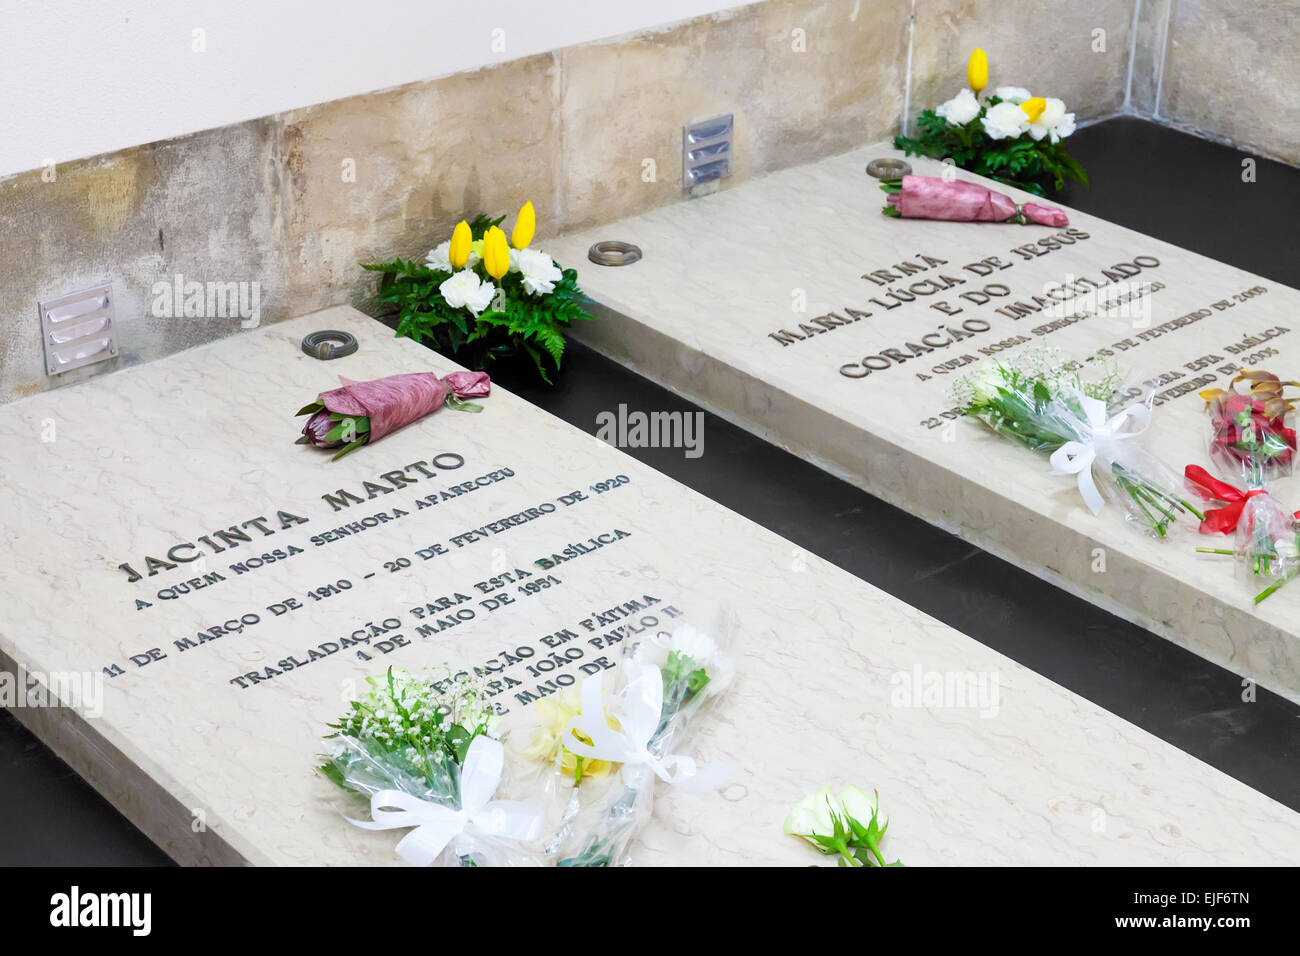 Sanctuary of Fatima, Portugal, March 07, 2015 - Tombs of Jacinta Marto and Sister Lucia, two of the three young shepherds that w Stock Photo